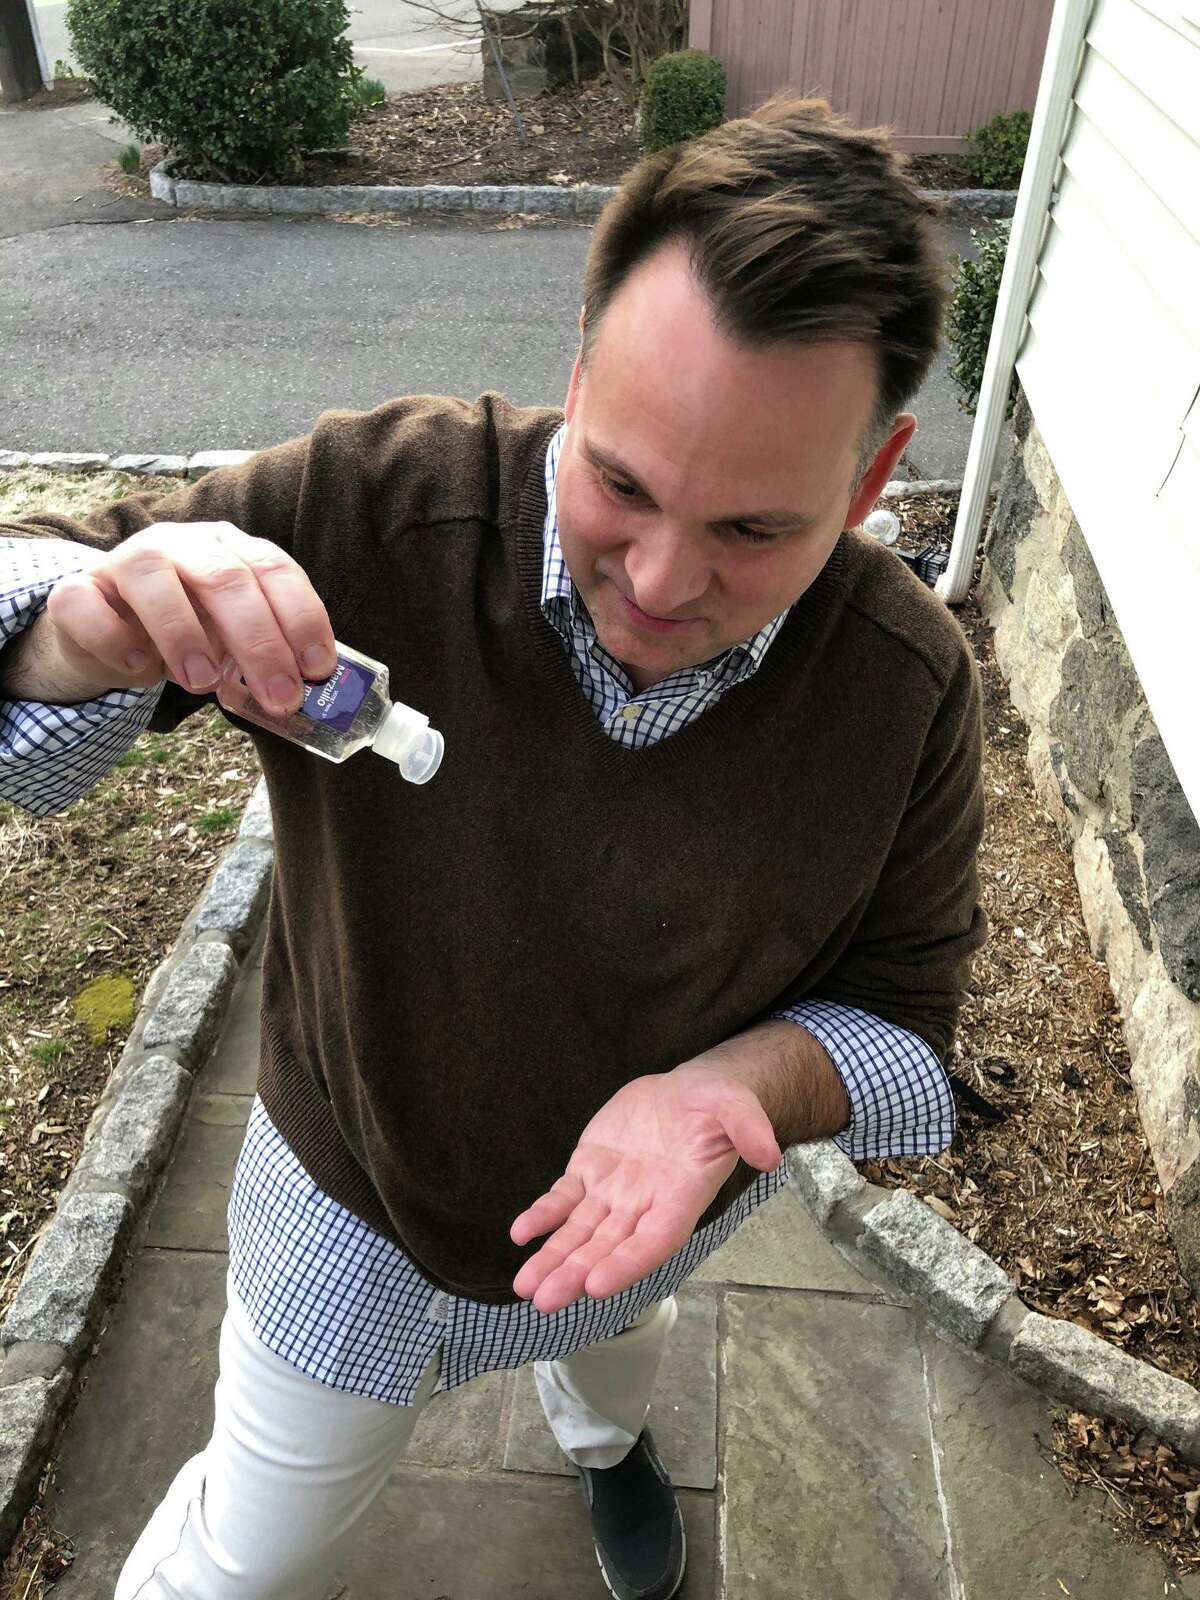 Former Selectman Drew Marzullo was well known on the campaign trail for giving away little bottles of hand sanitizer. Now that there is a huge shortage due to coronavirus, Marzullo is breaking out his remaining bottles and giving them away to people who need them.